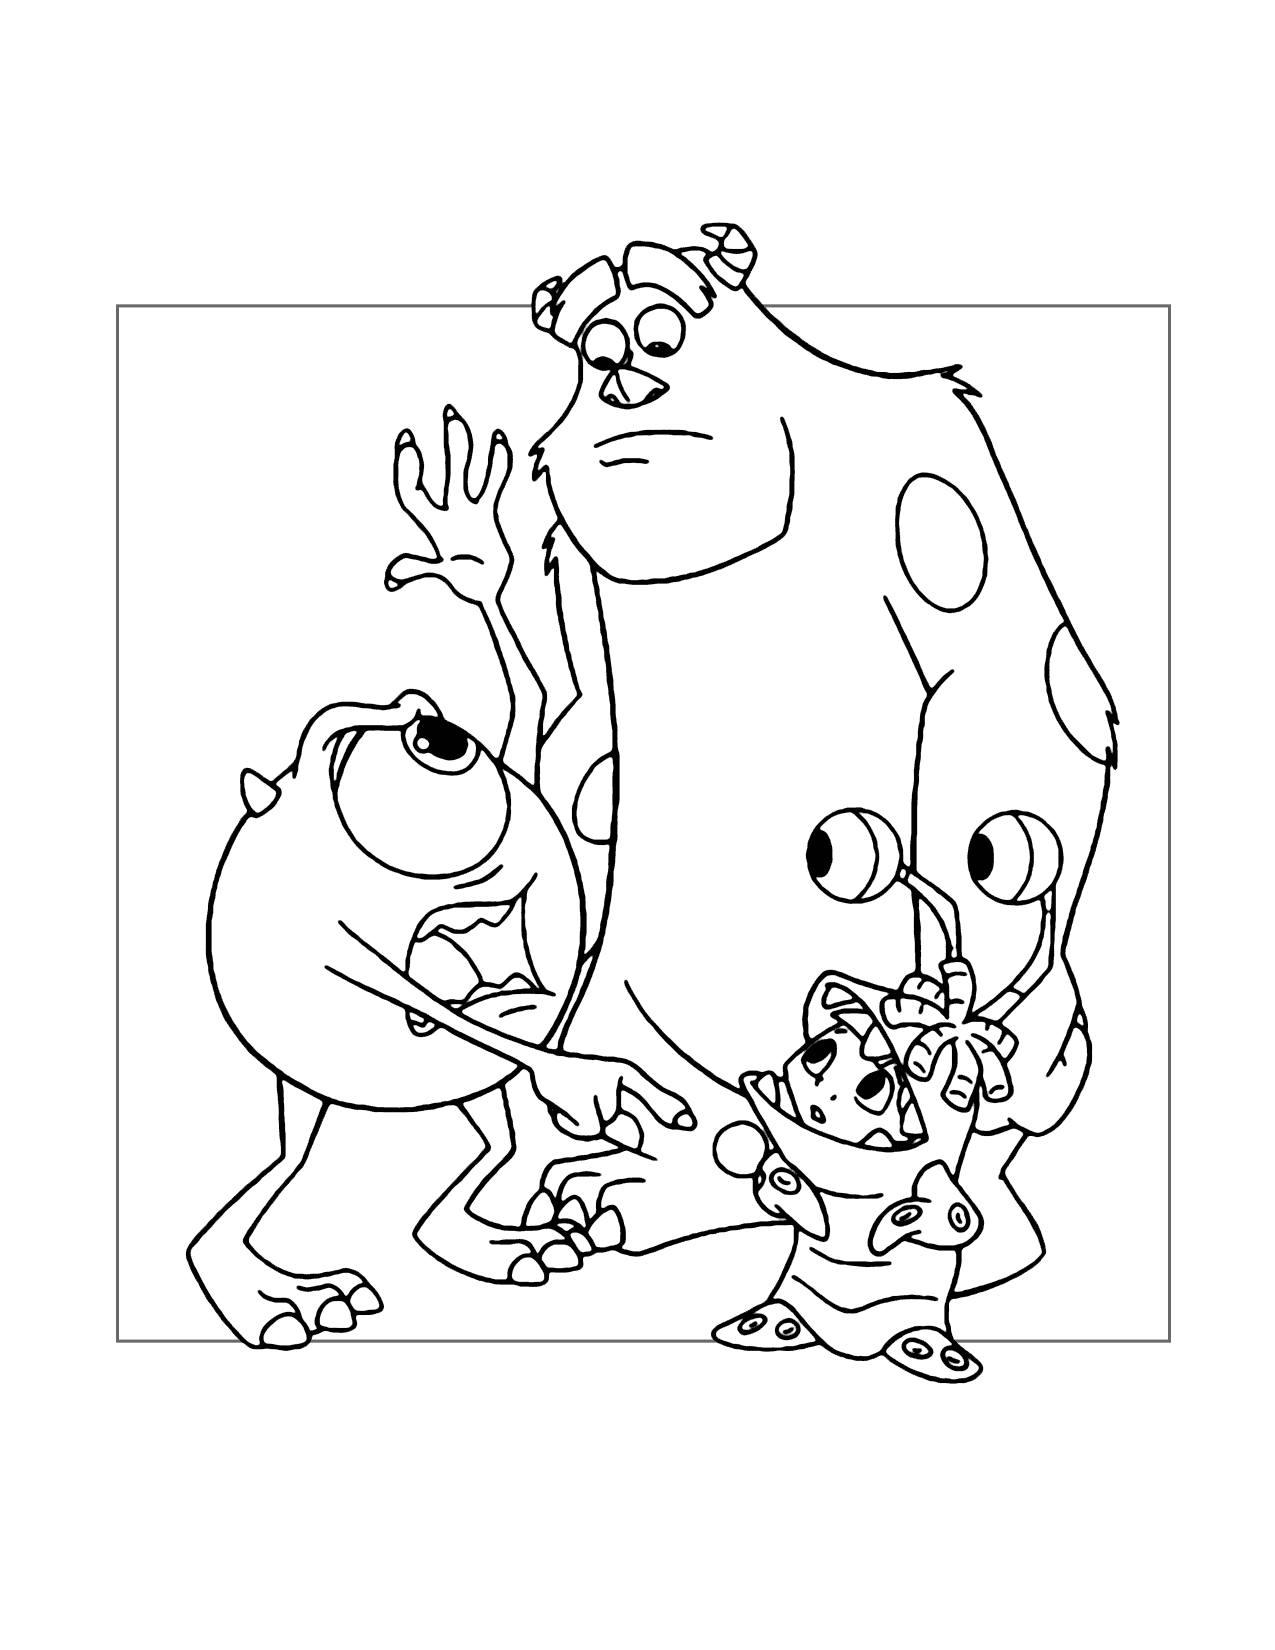 Put That Thing Back Where It Came From Monsters Inc Coloring Page